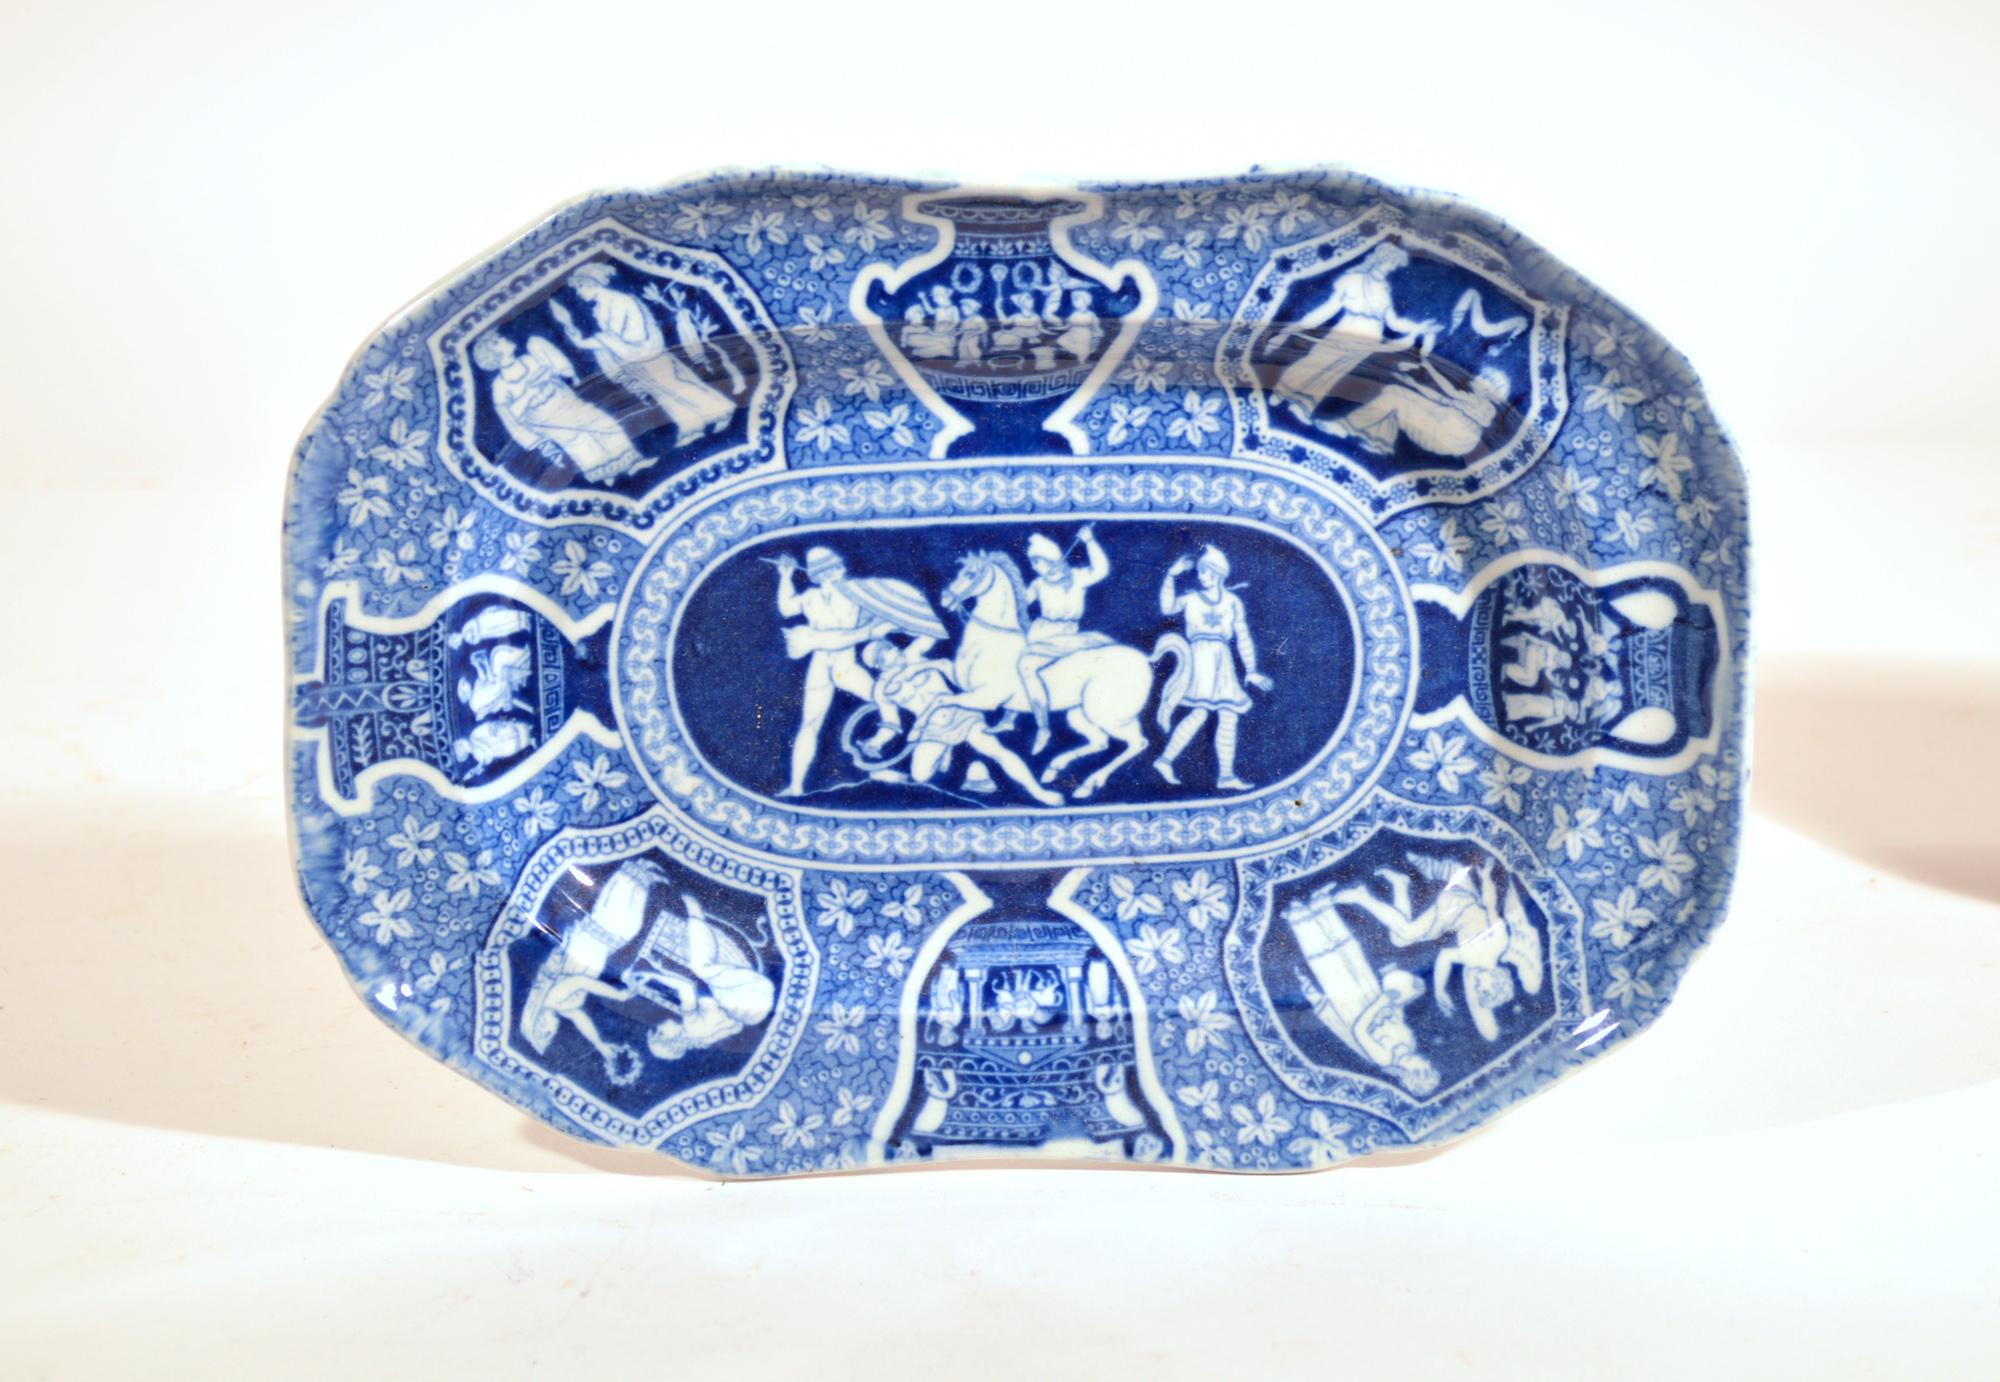 Spode neo-Classical Greek pattern blue rectangular dessert dishes,
Four figures in battle,
Early 19th century

The Spode Greek pattern pottery dishes are printed in blue with 